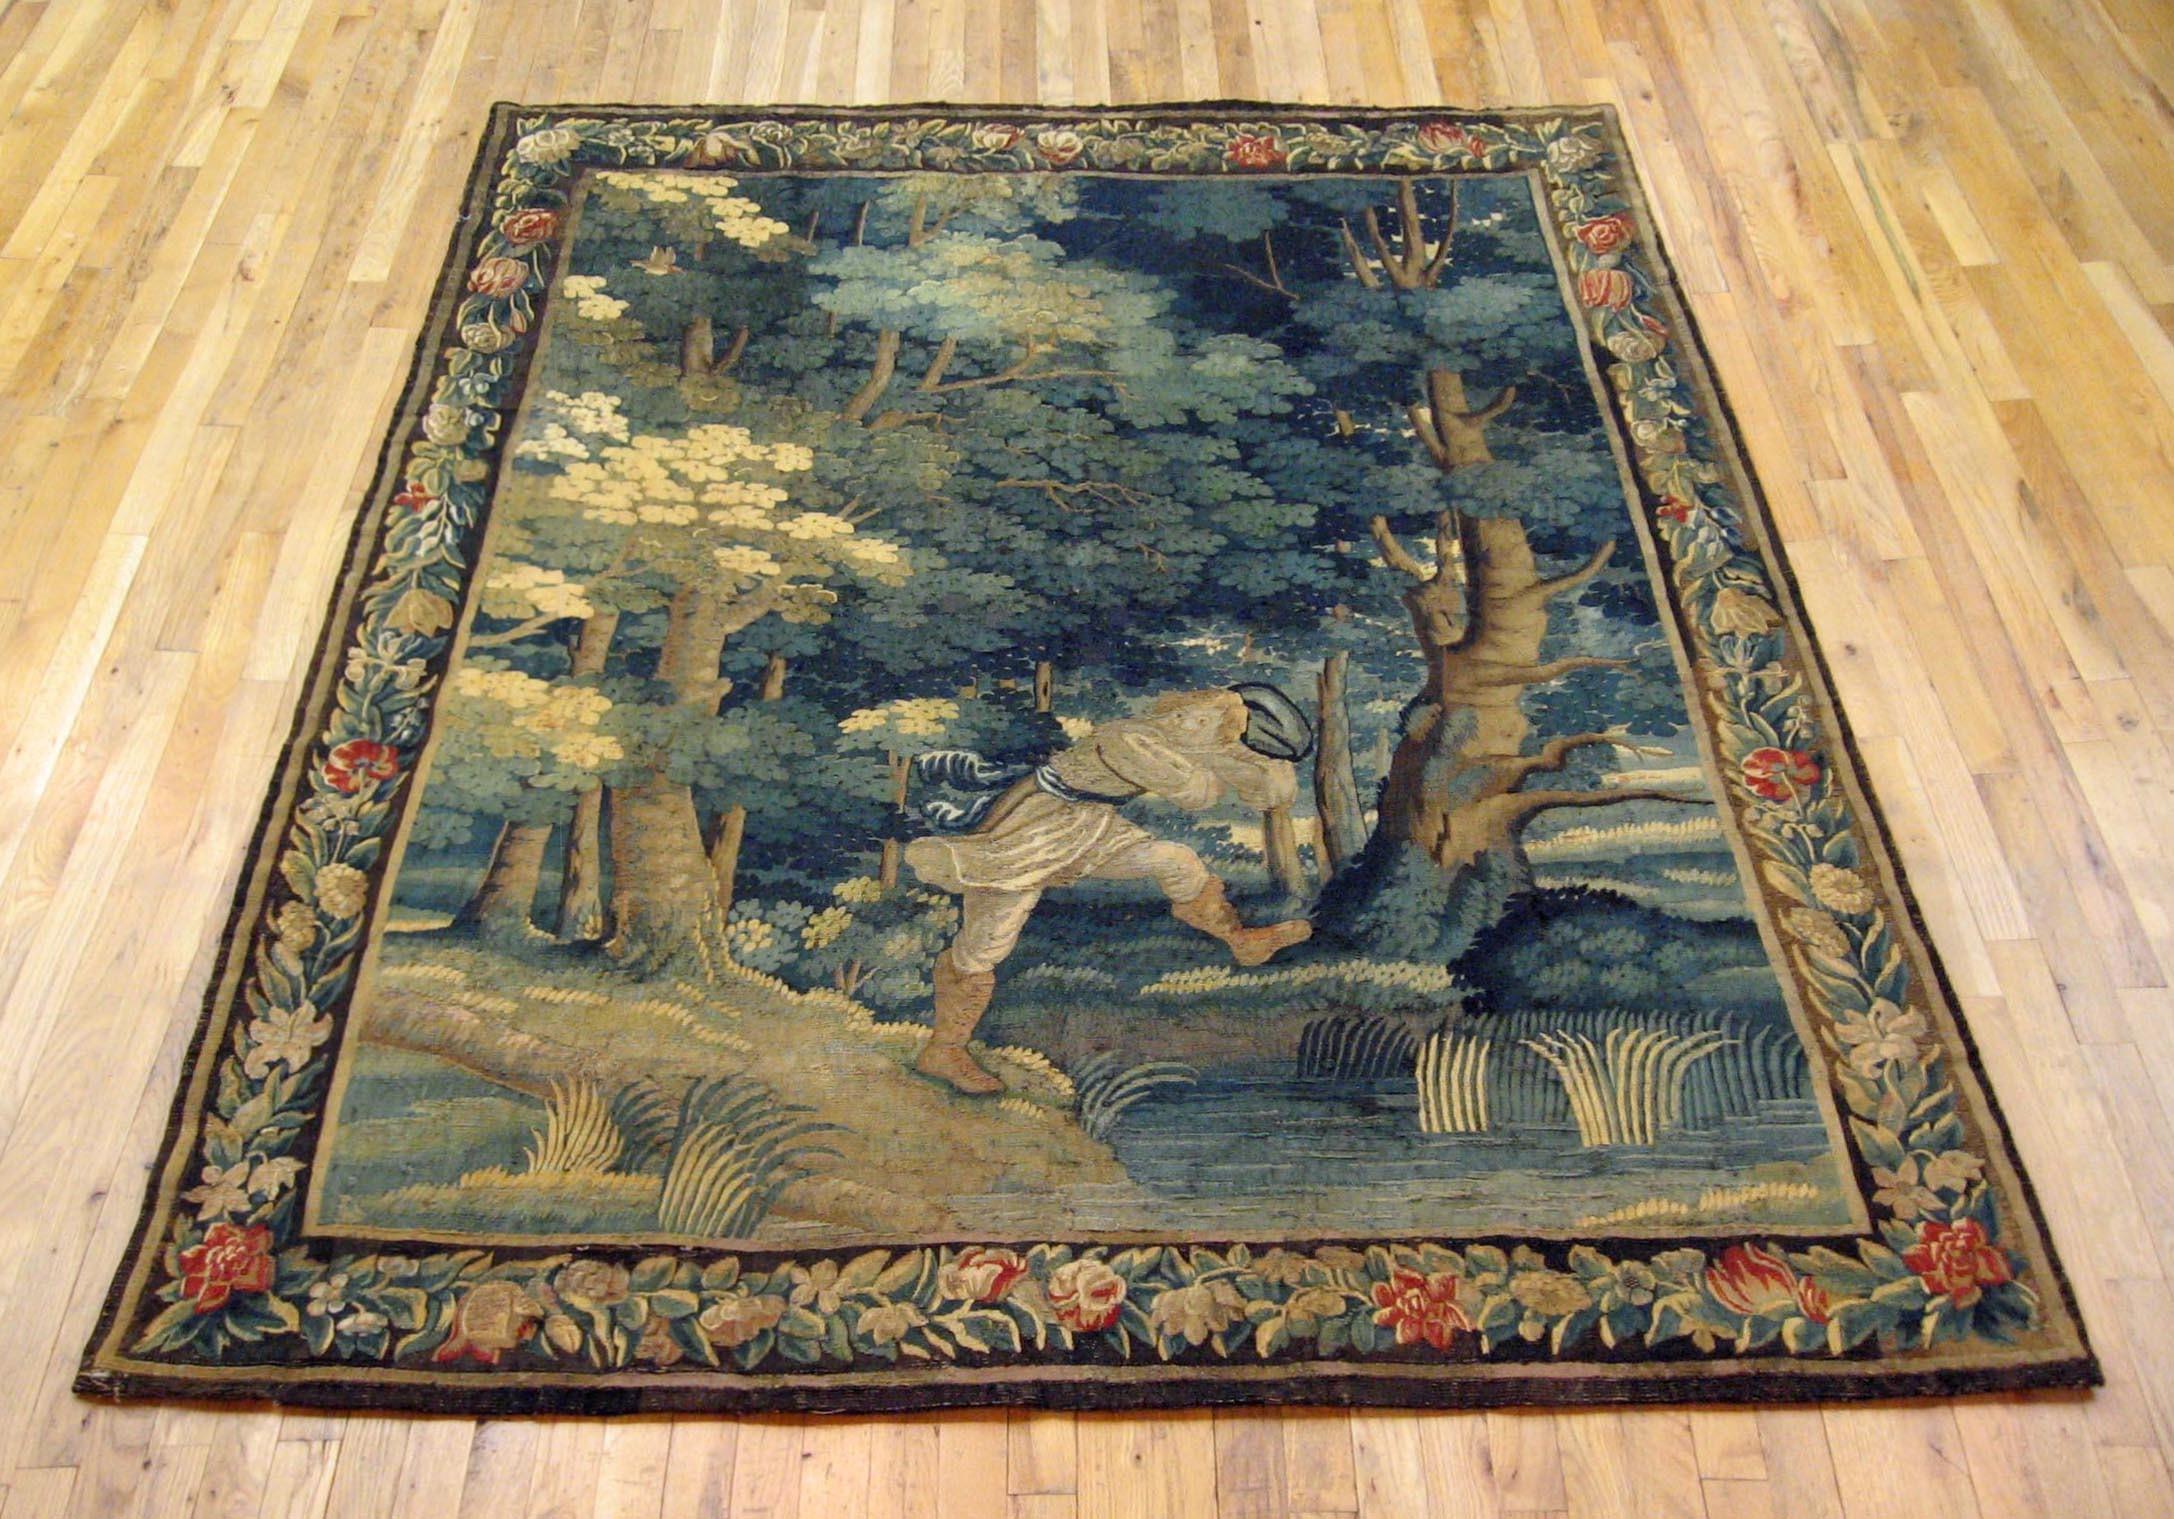 A Flemish verdure rustic tapestry from the early 18th century, circa 1700, depicting a youth a verdant lakeside setting, surrounded by stately trees and other greenery. Enclosed within a scrolling foliate border. Wool with silk inlay. Measures: 7’8”